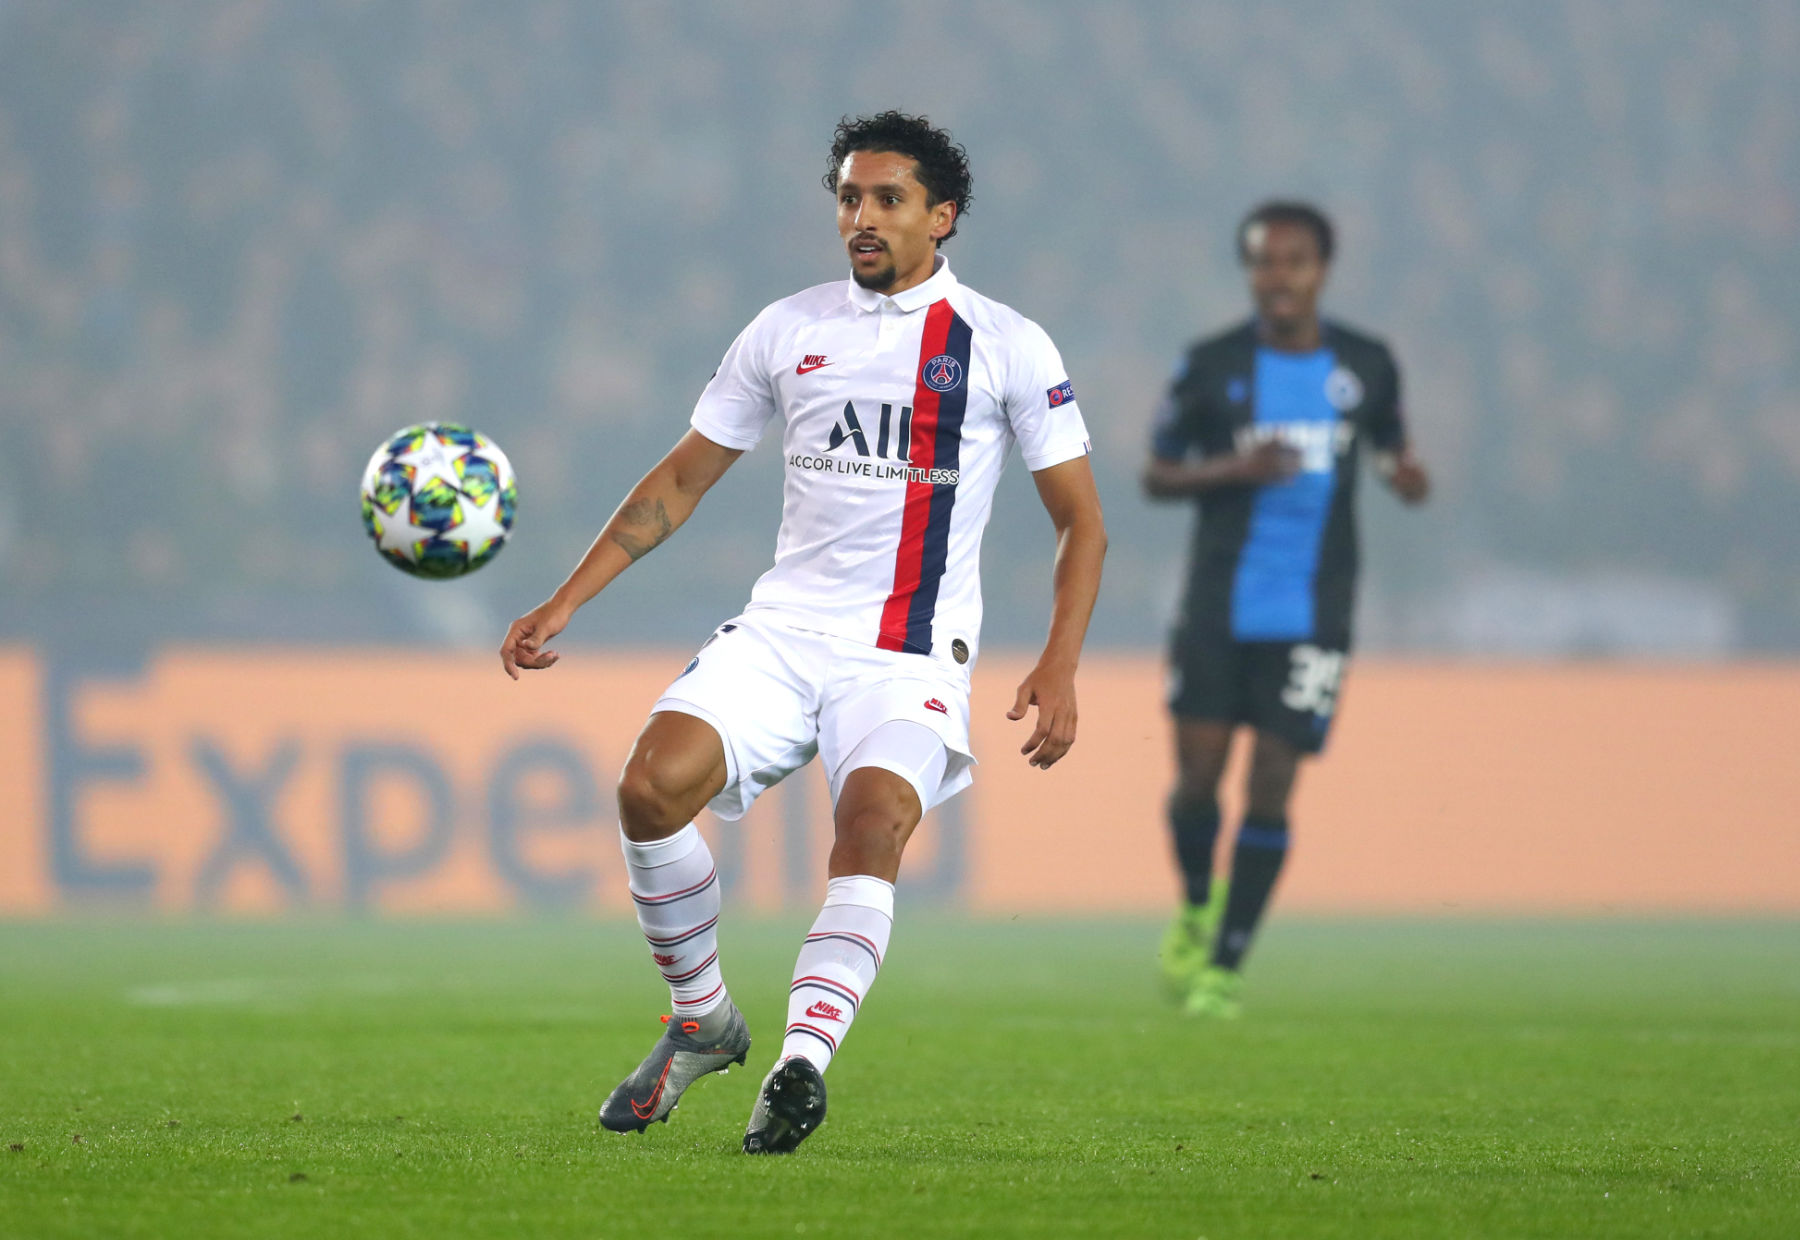 The Serious Matches Start Now' - Marquinhos - PSG Talk